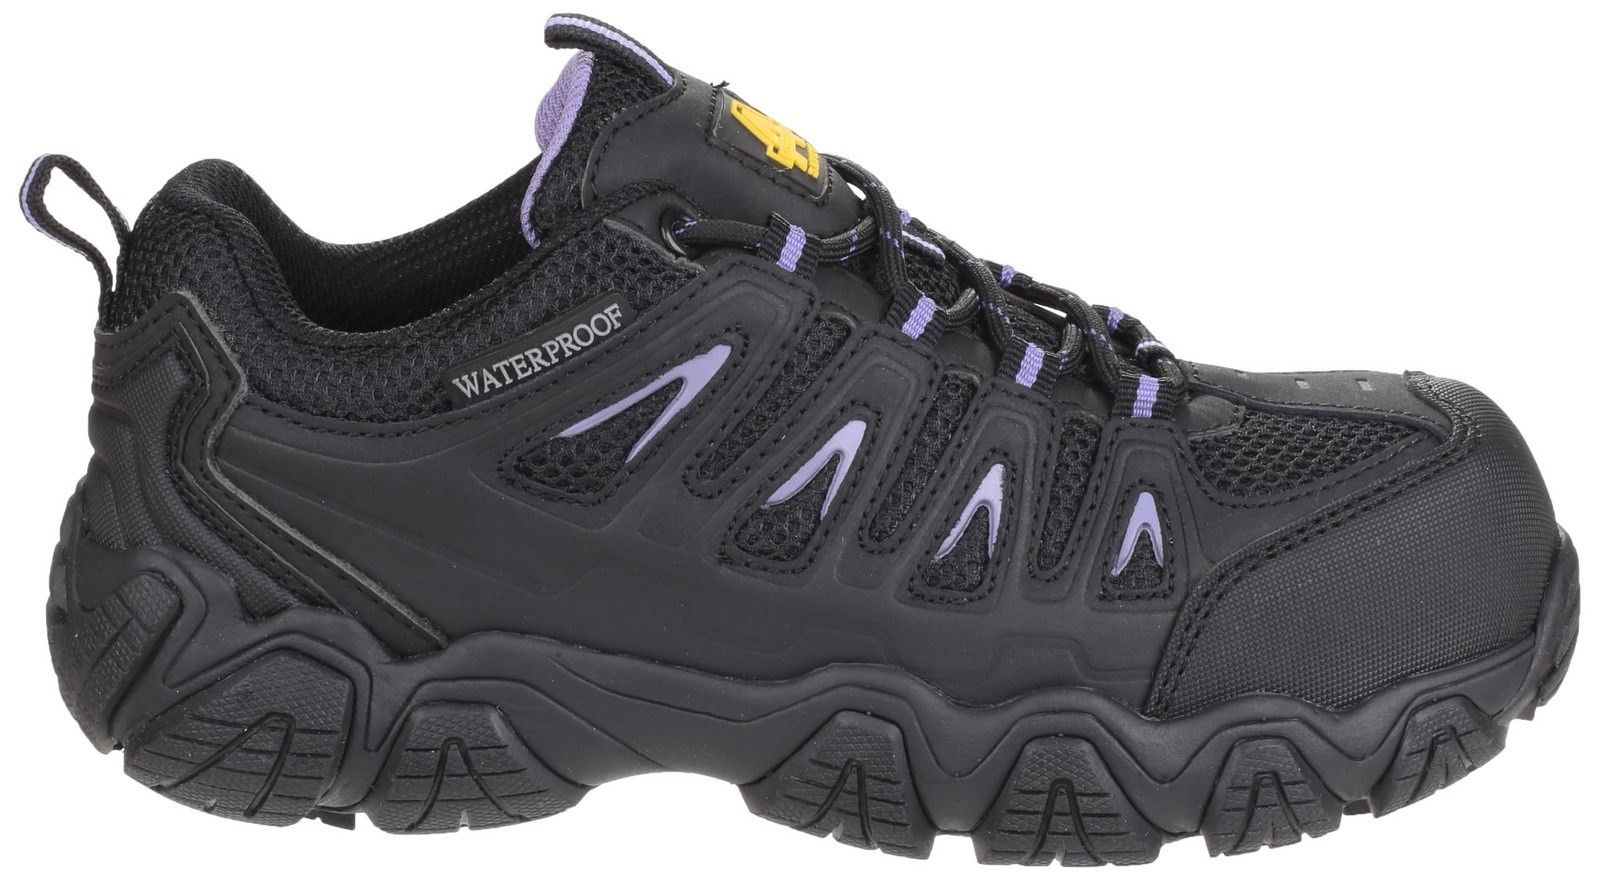 Ladies non-metal waterproof safety trainer featuring memory foam footbed and hardwearing EVA/Rubber outsole.200 Joules composite toe cap. 
Non-metallic, anti-penetration midsole. 
Water resistant leather & mesh upper. 
Breathable waterproof membrane and mesh lining. 
Padded collar & padded bellowed tongue.